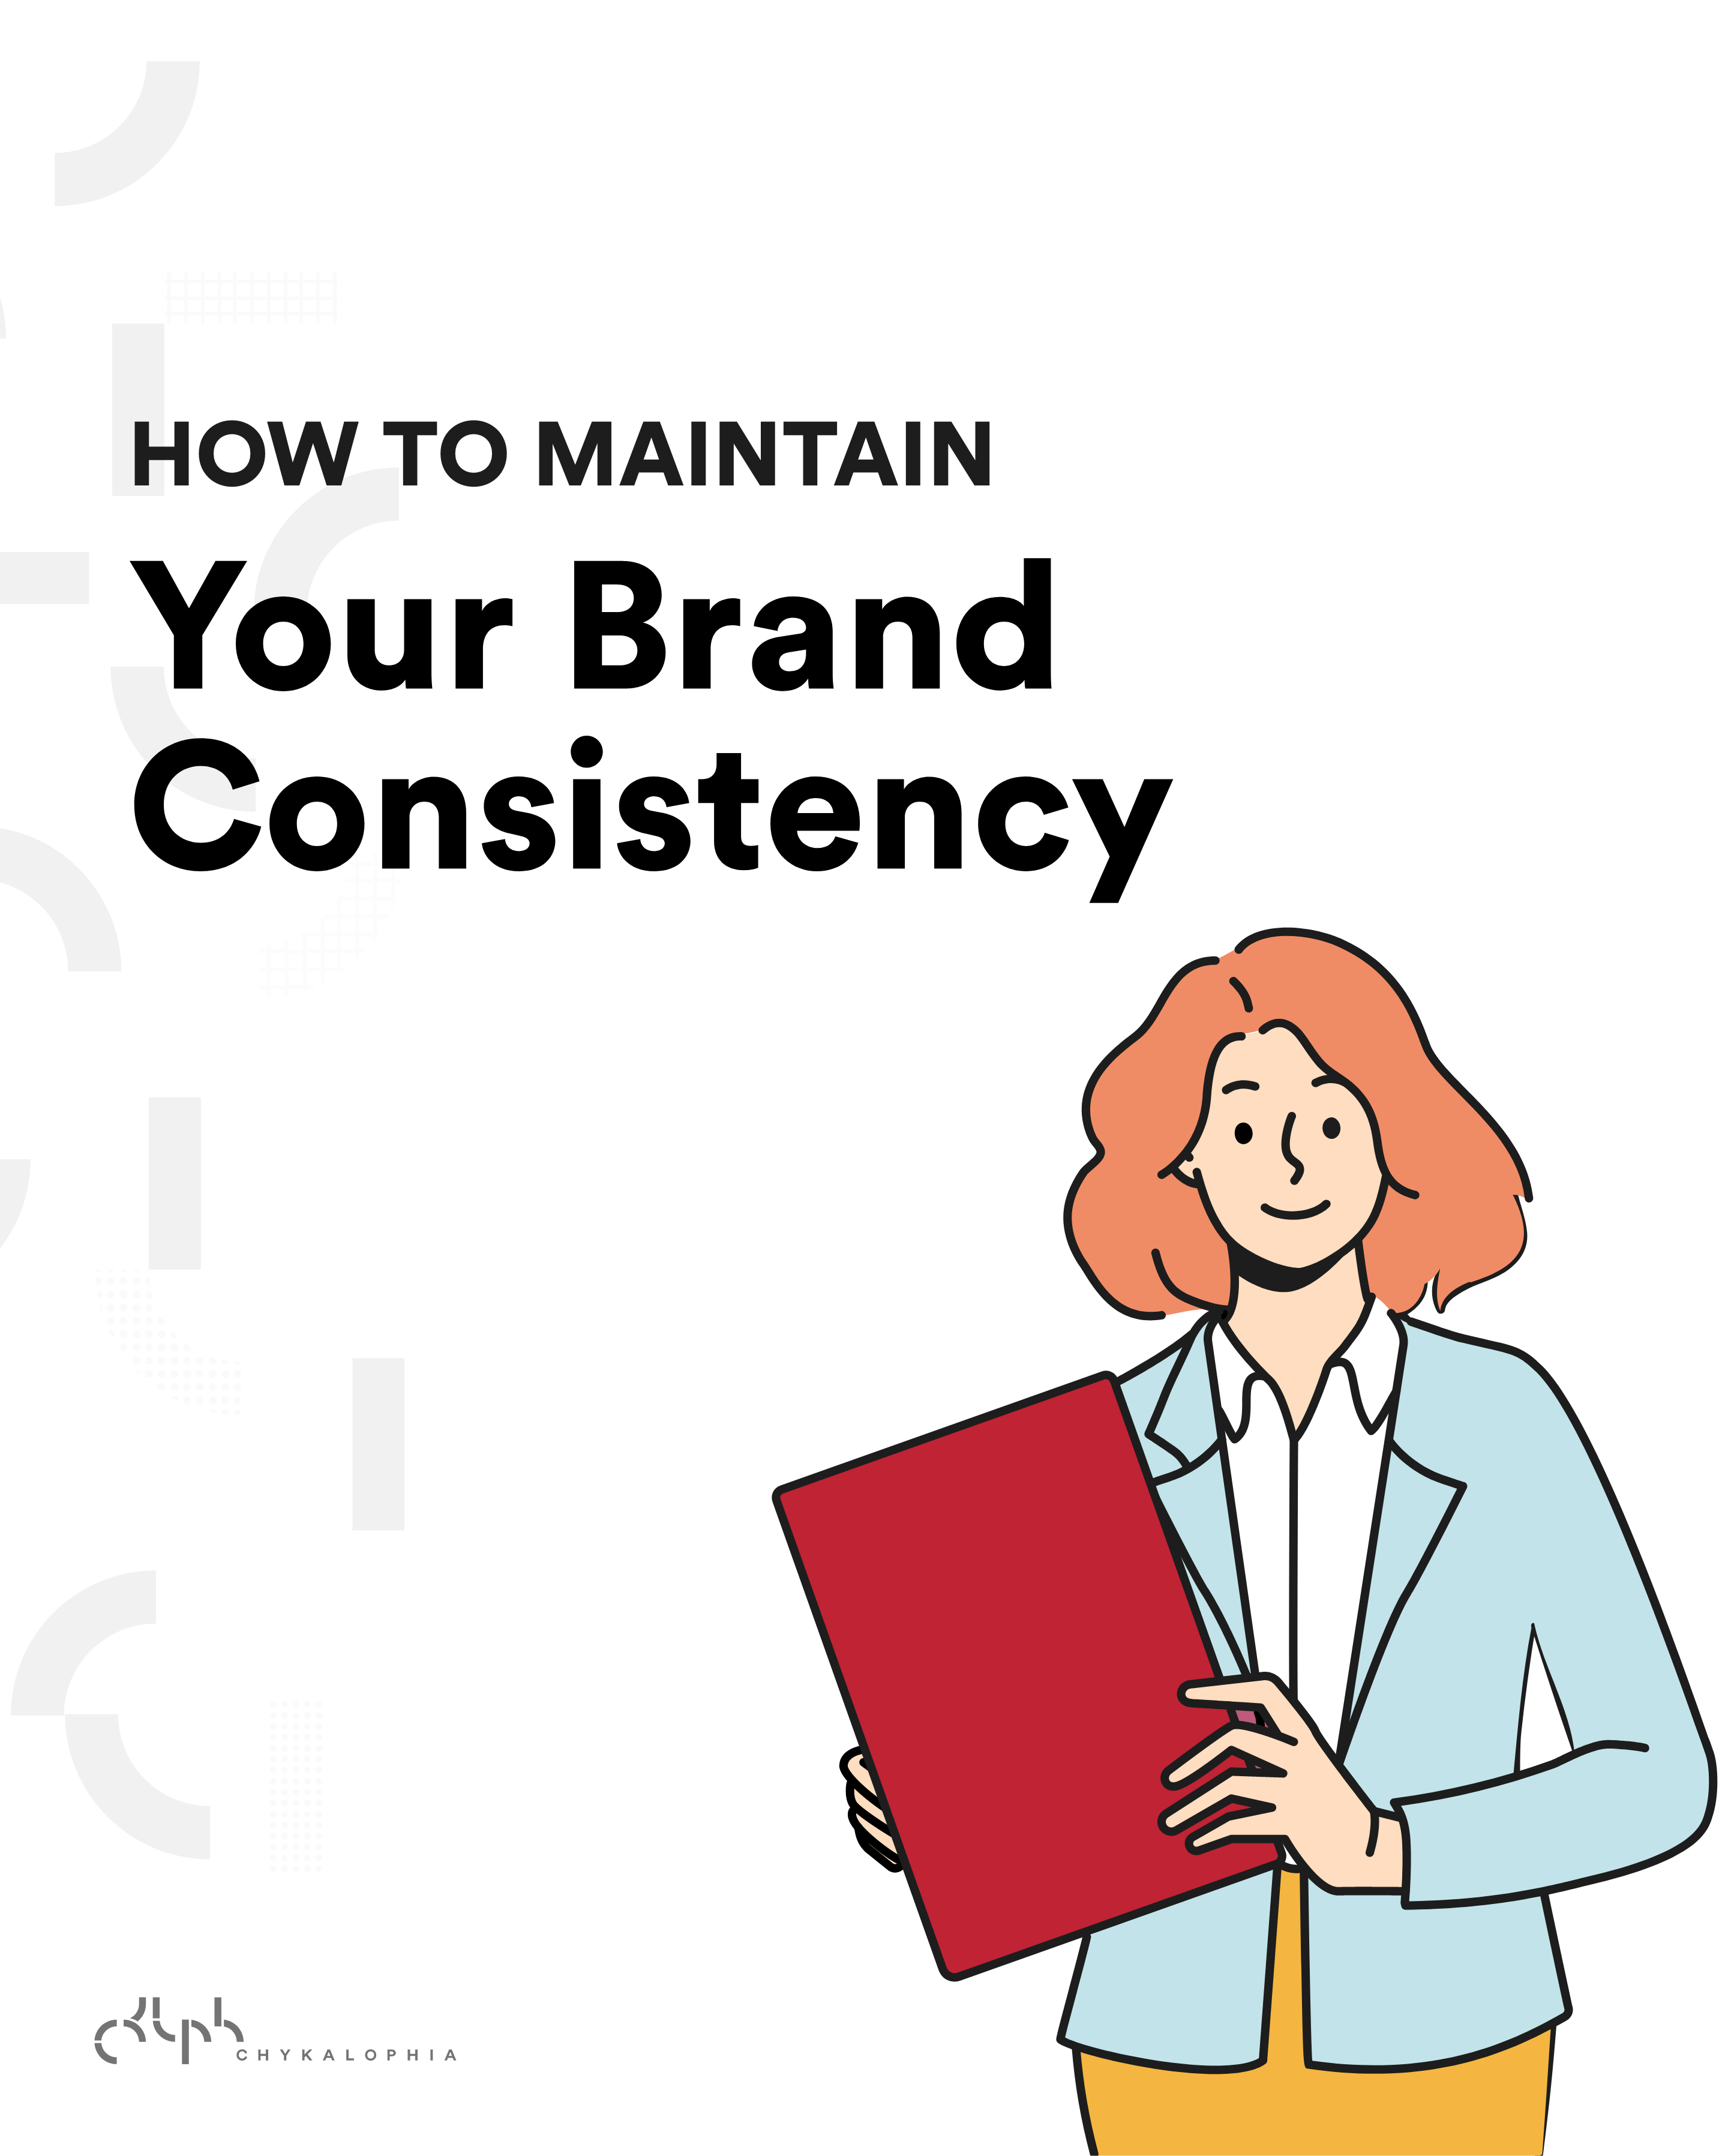 How to maintain brand consistency - 3 questions to answer - Chykalophia